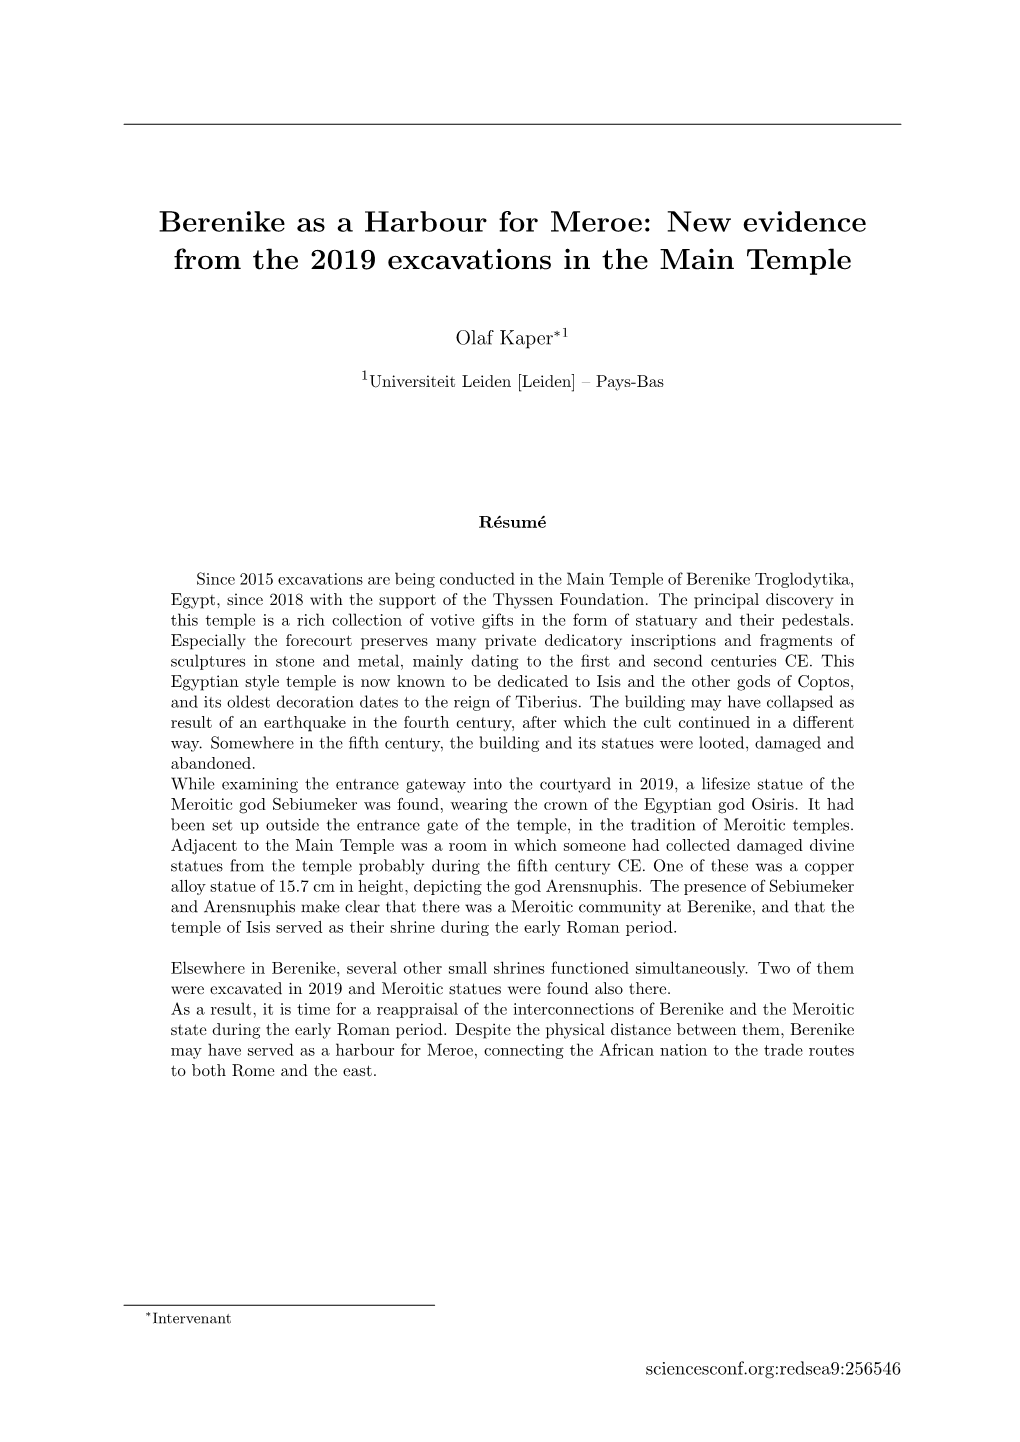 Berenike As a Harbour for Meroe: New Evidence from the 2019 Excavations in the Main Temple